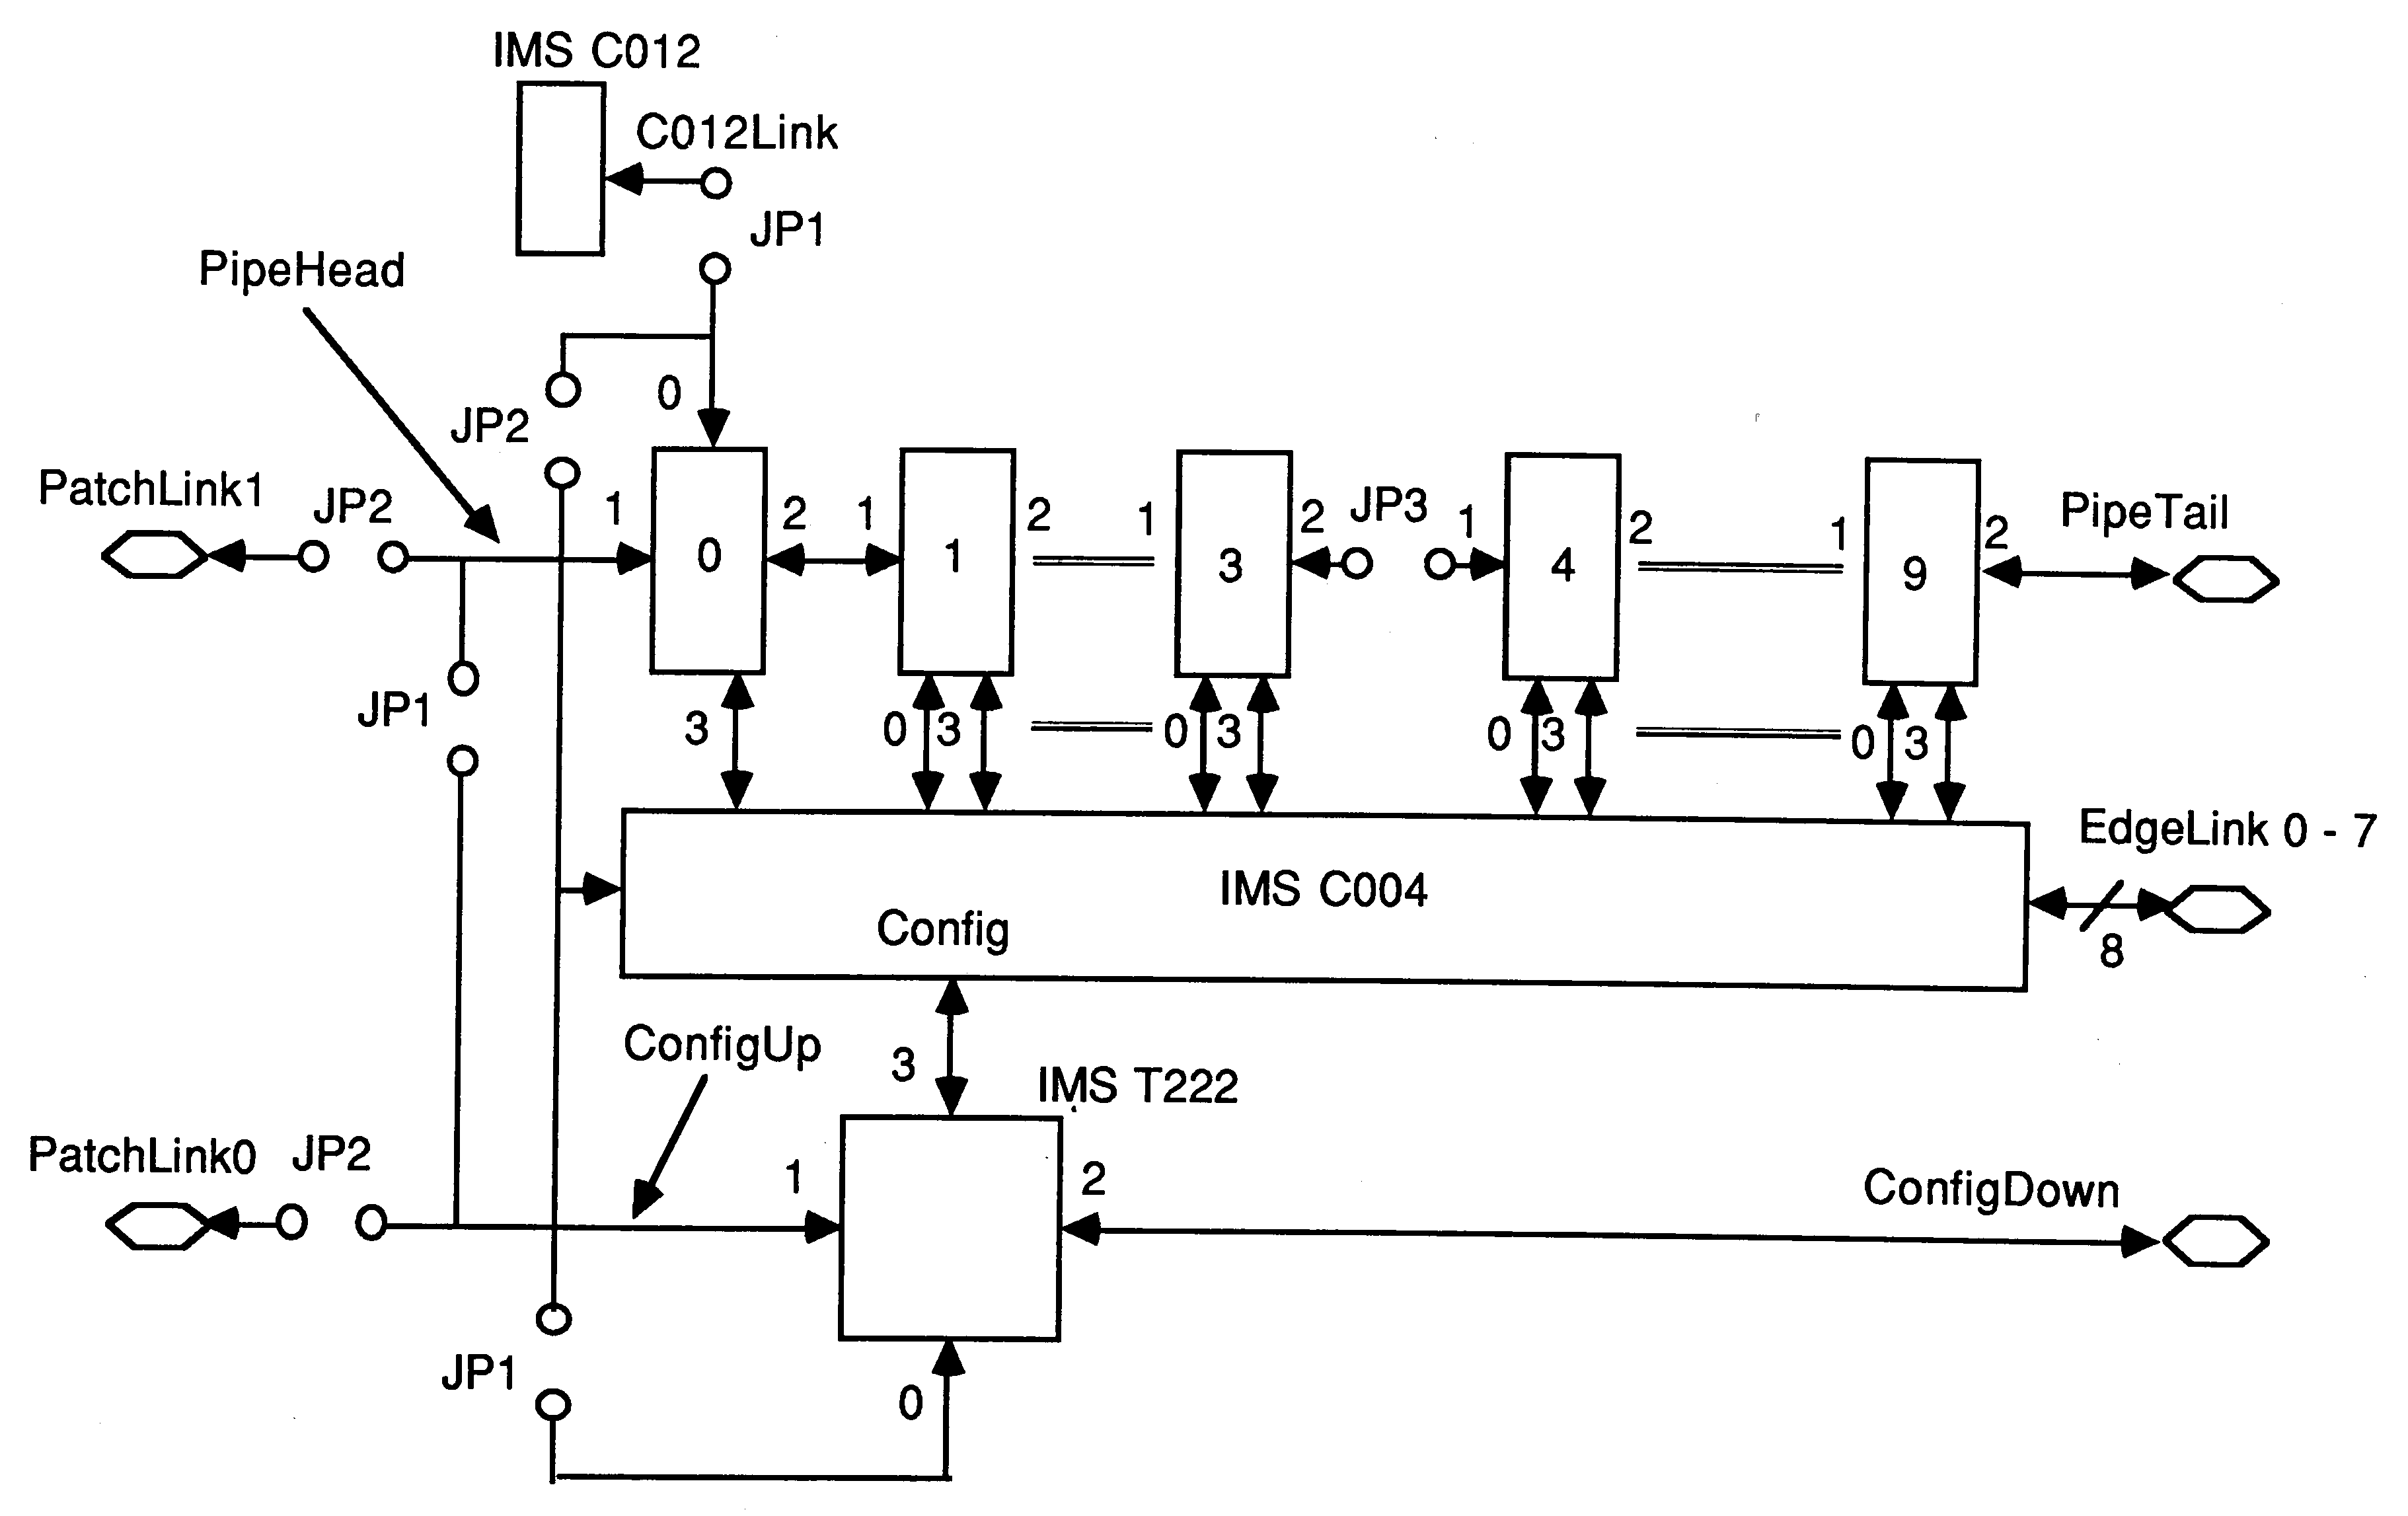 INMOS link connections on the
IMS B008